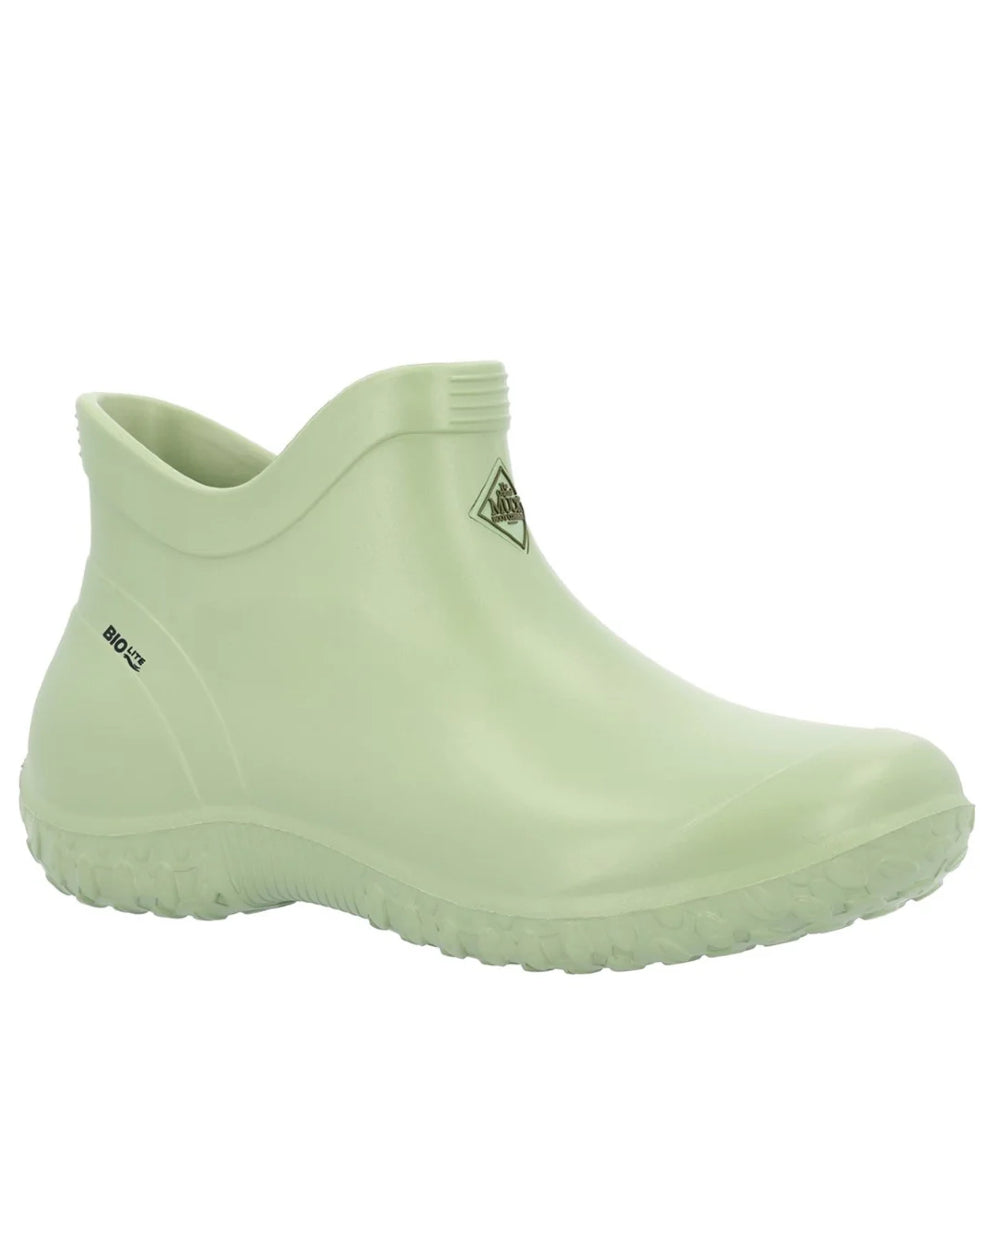 Resida Green Coloured Muck Boots Womens Muckster Lite Ankle Boots On A White Background 